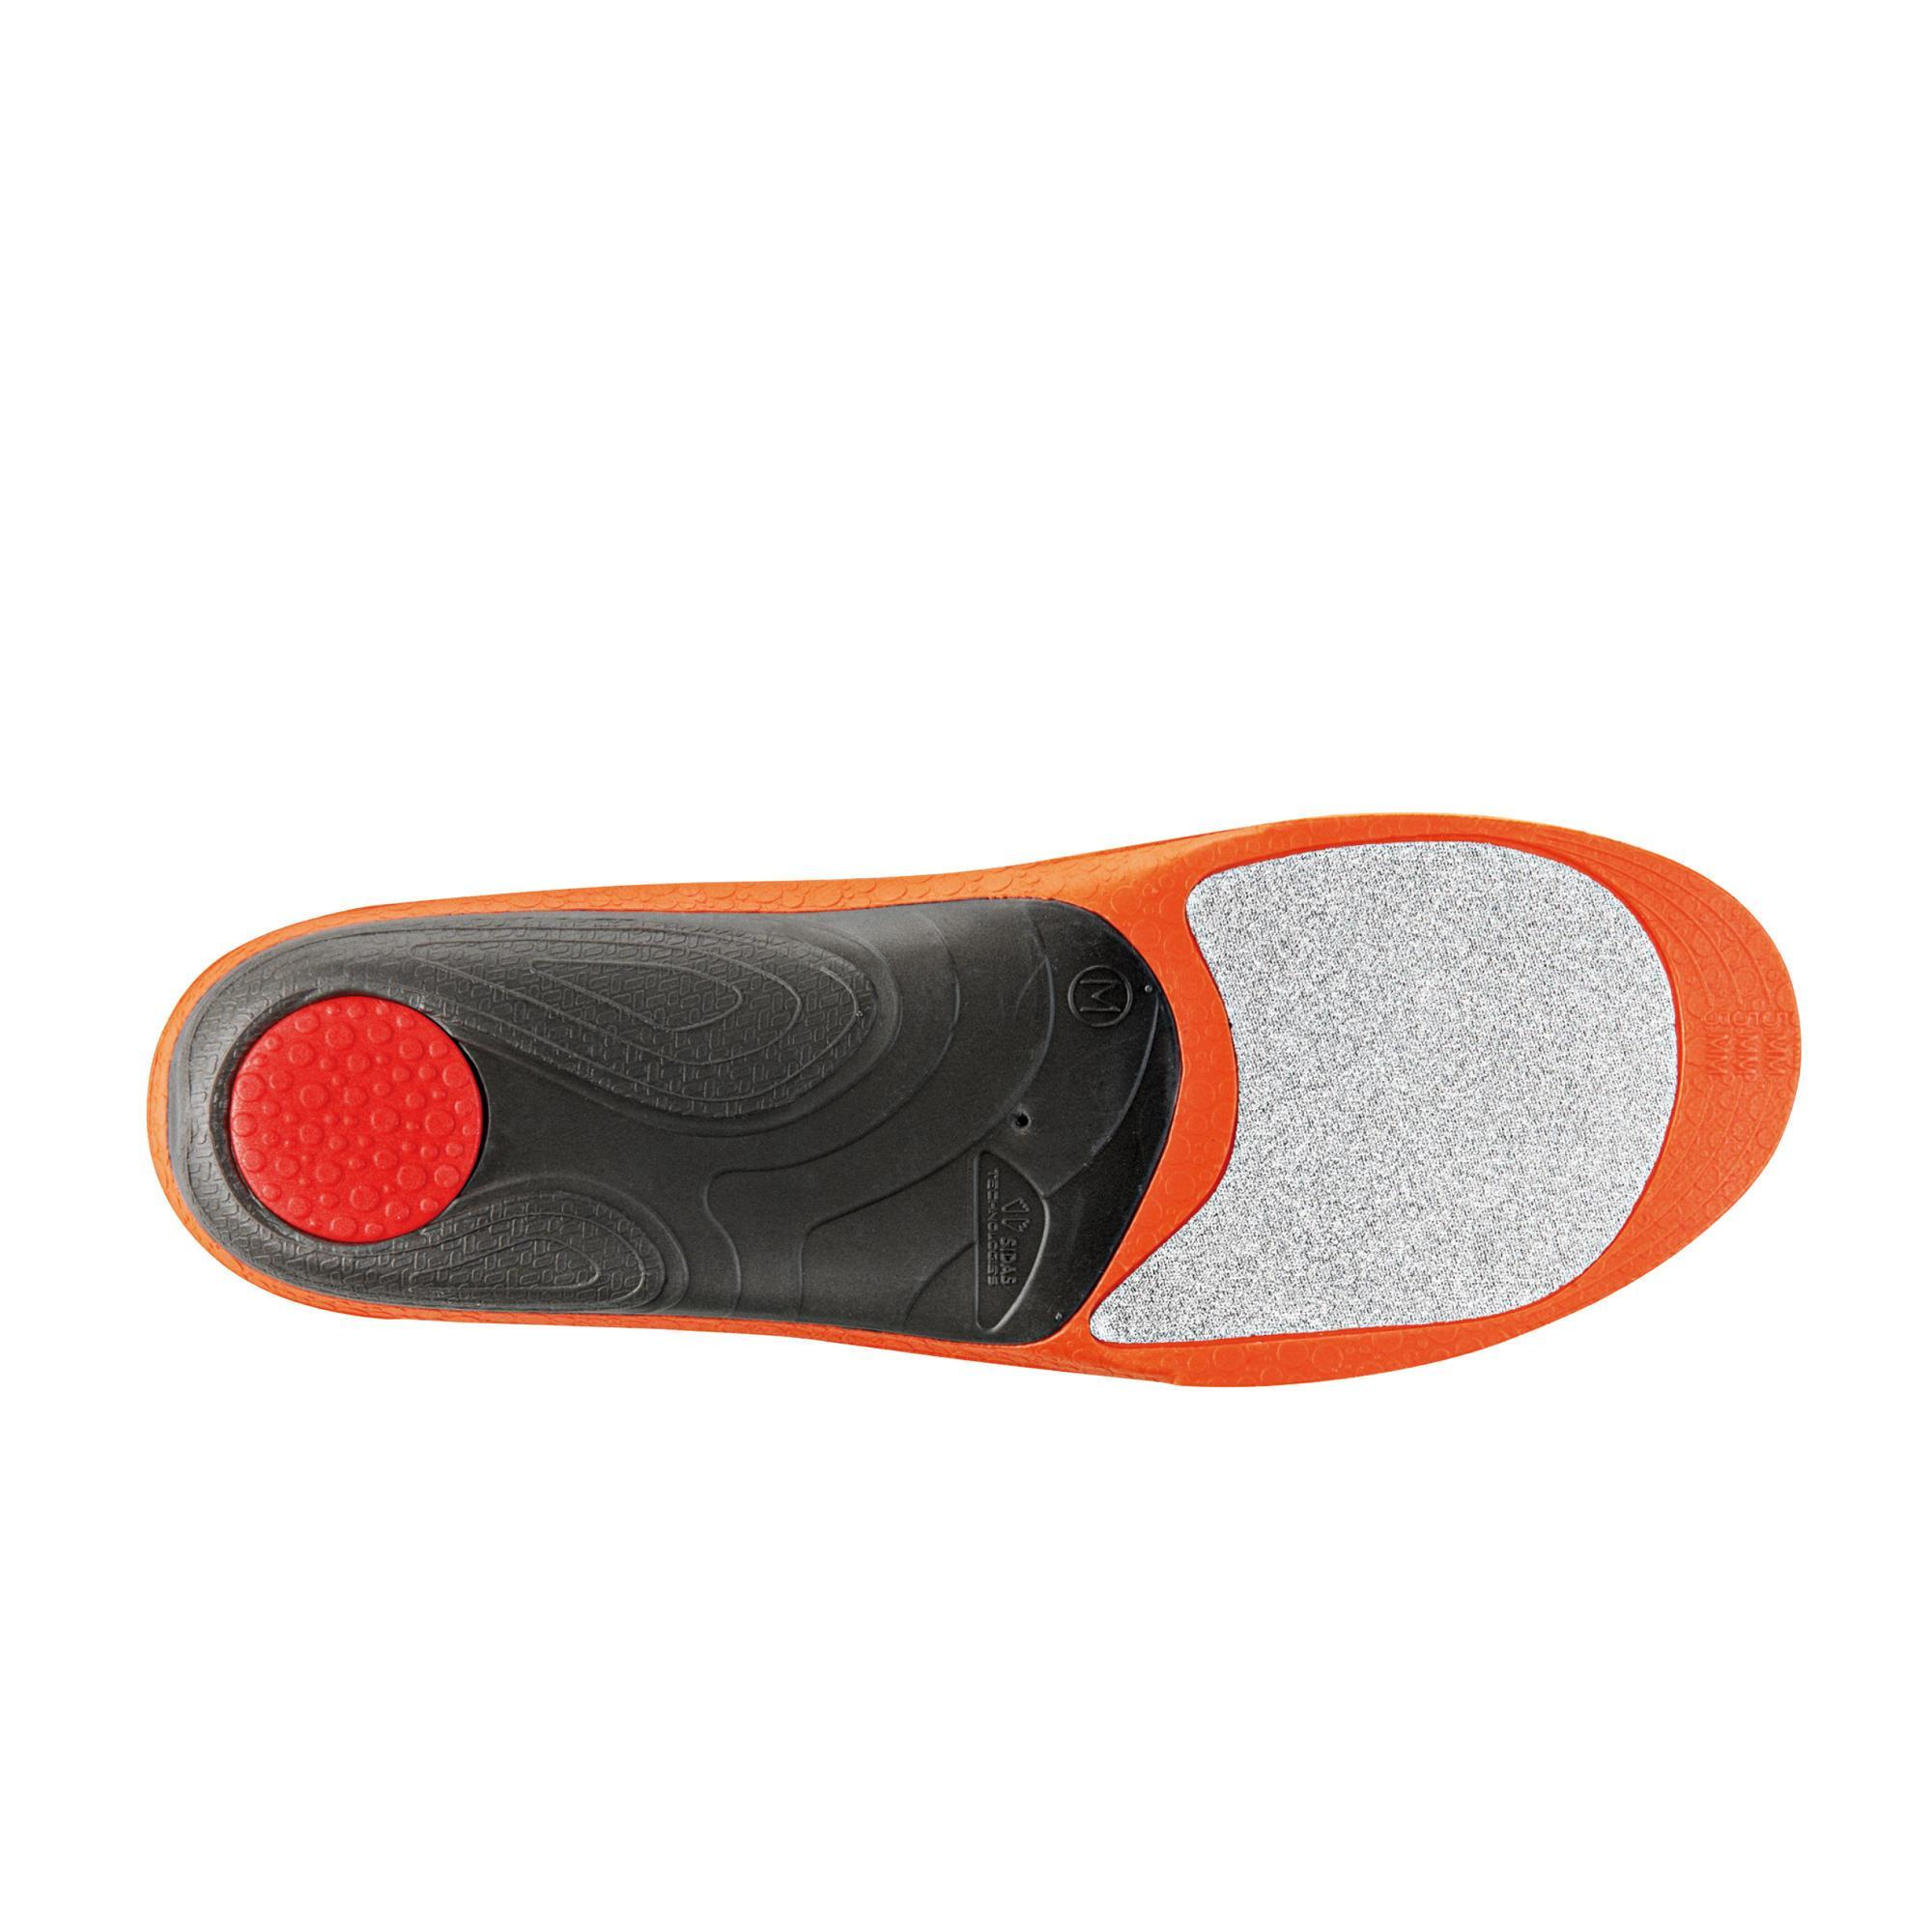 ski boot insoles for flat feet